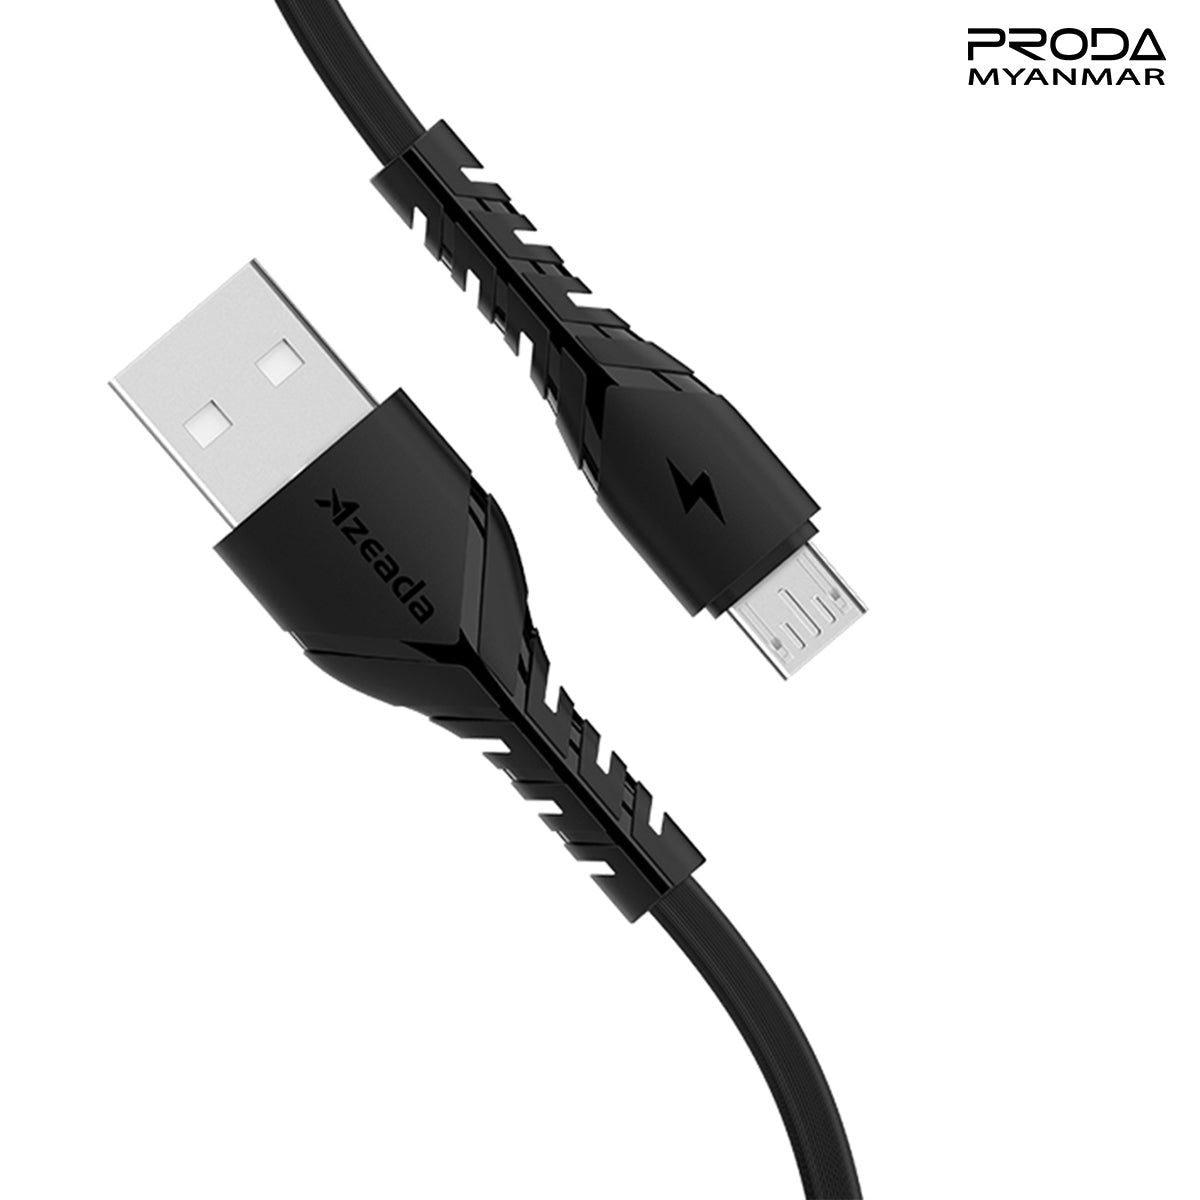 PRODA PD-B47 WING SERIES DATA CABLE PD-B47 (1000MM) (3A), Data Cable, Charging Cable for Android, iPhone,Cable for Micro, Type-C, iPhone